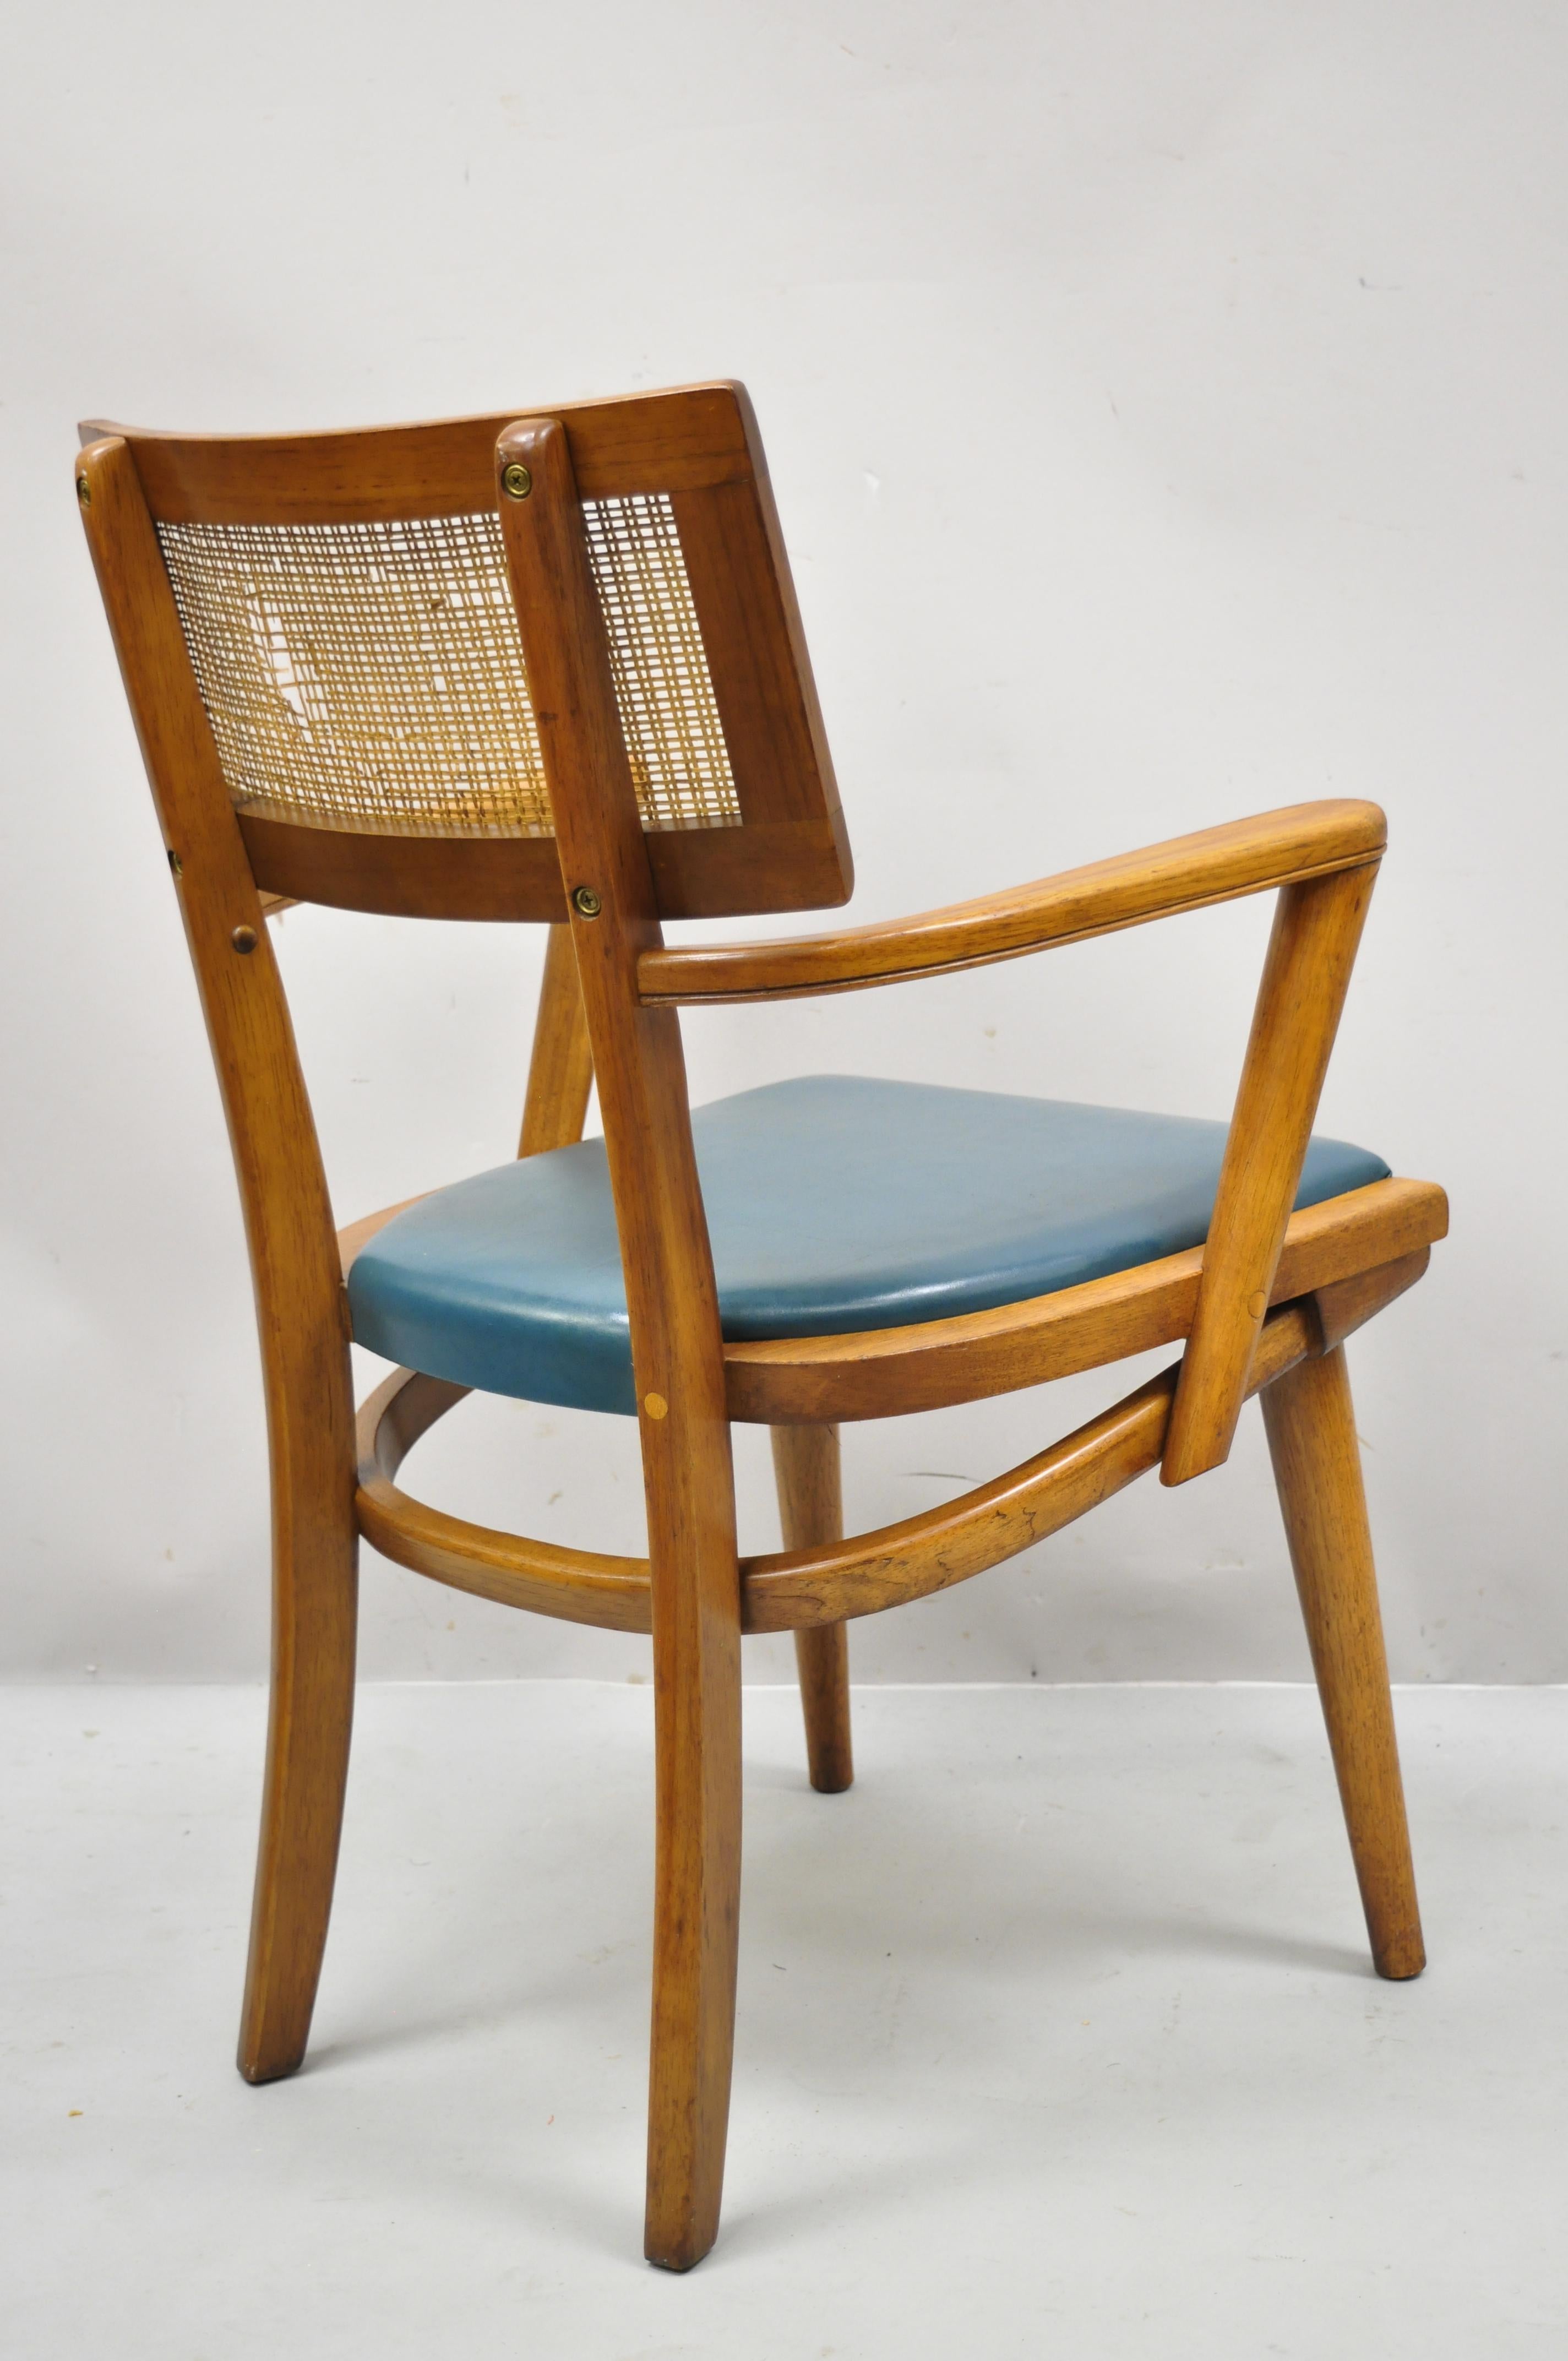 20th Century The Boling Changebak Chair Walnut Cane Back Mid Century by Boling Chair Co. 'A'